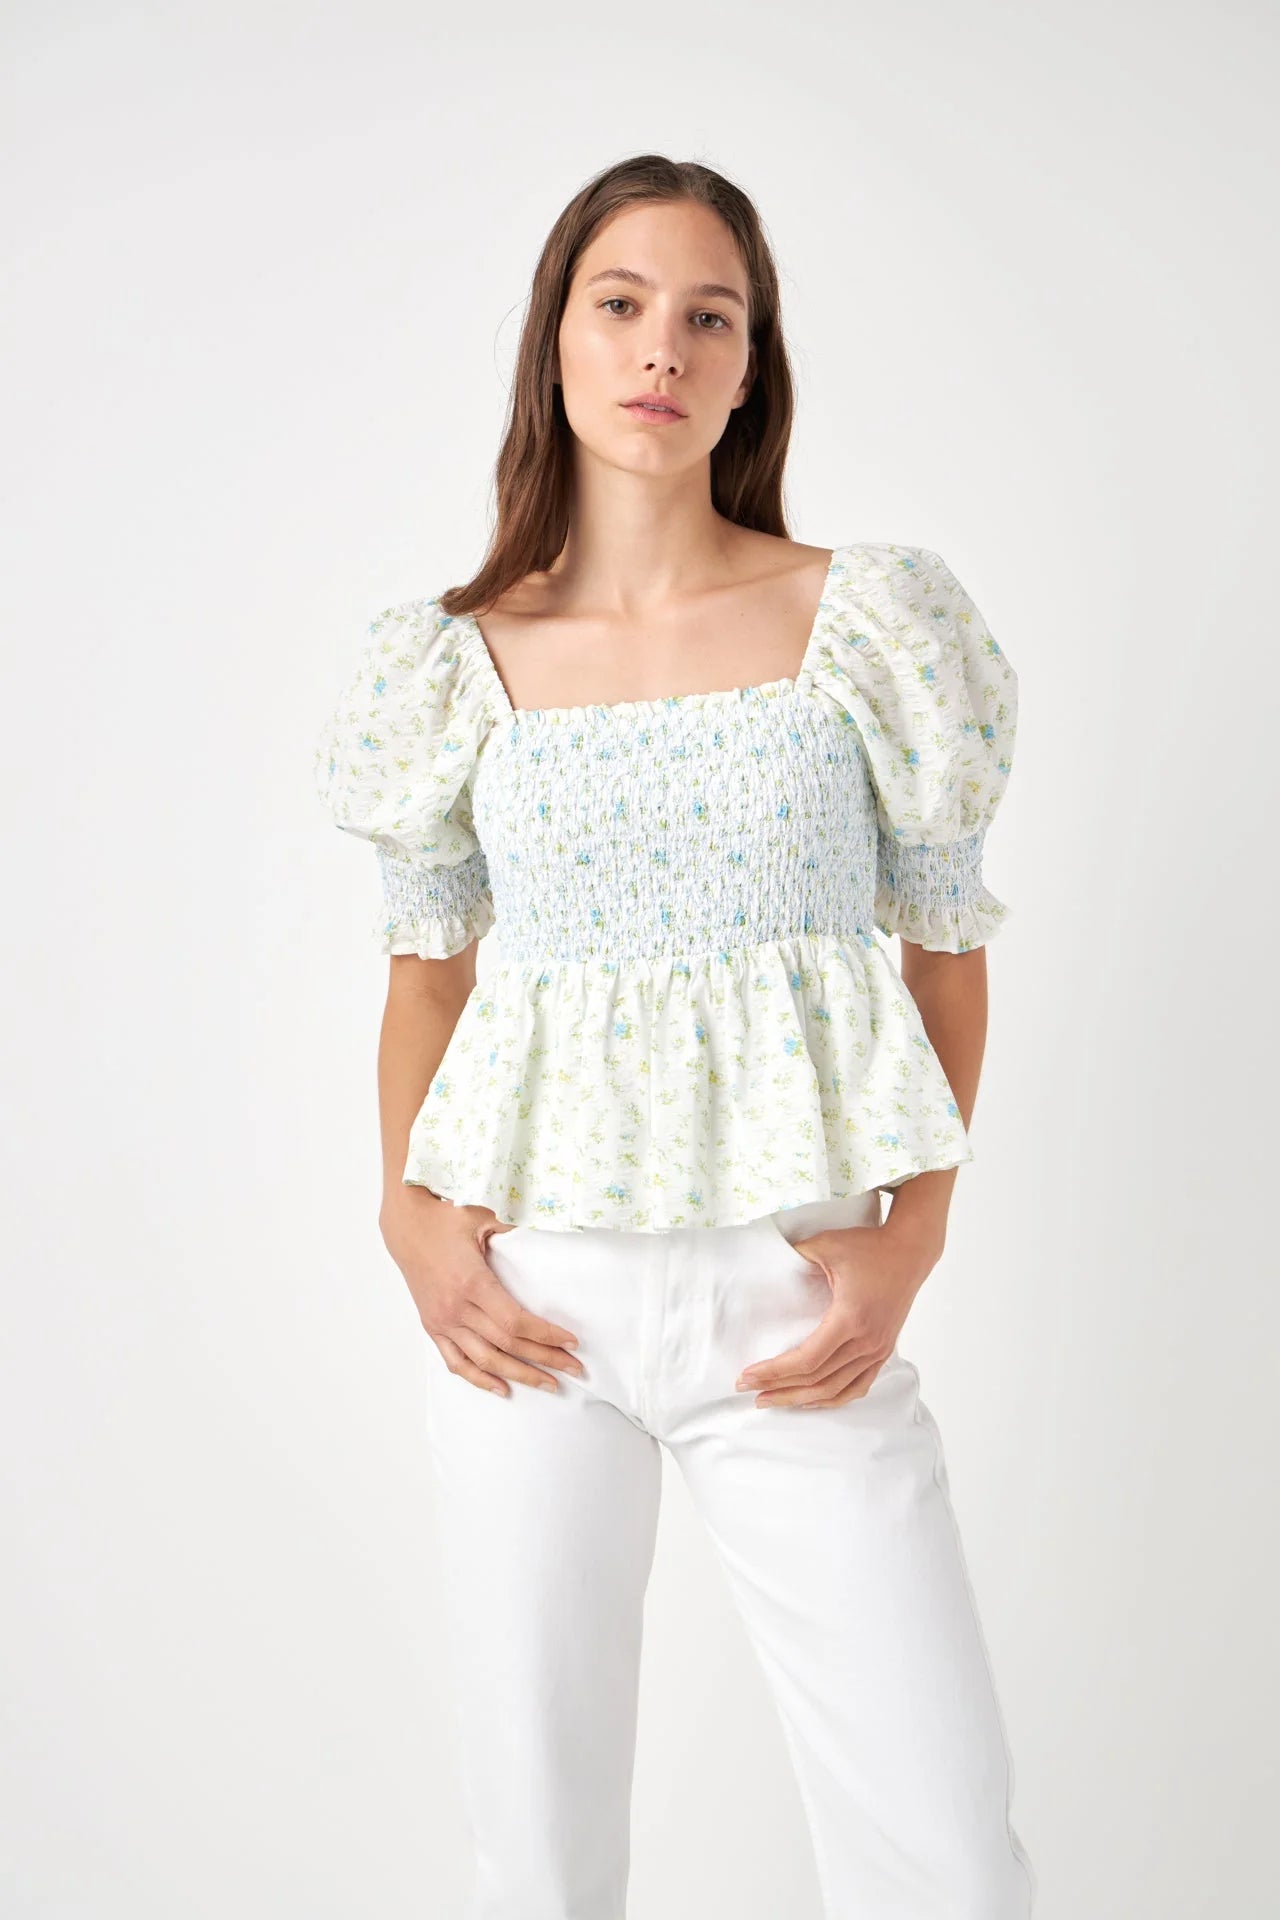 Smocked Floral Puff Sleeve Top | Blue Multi